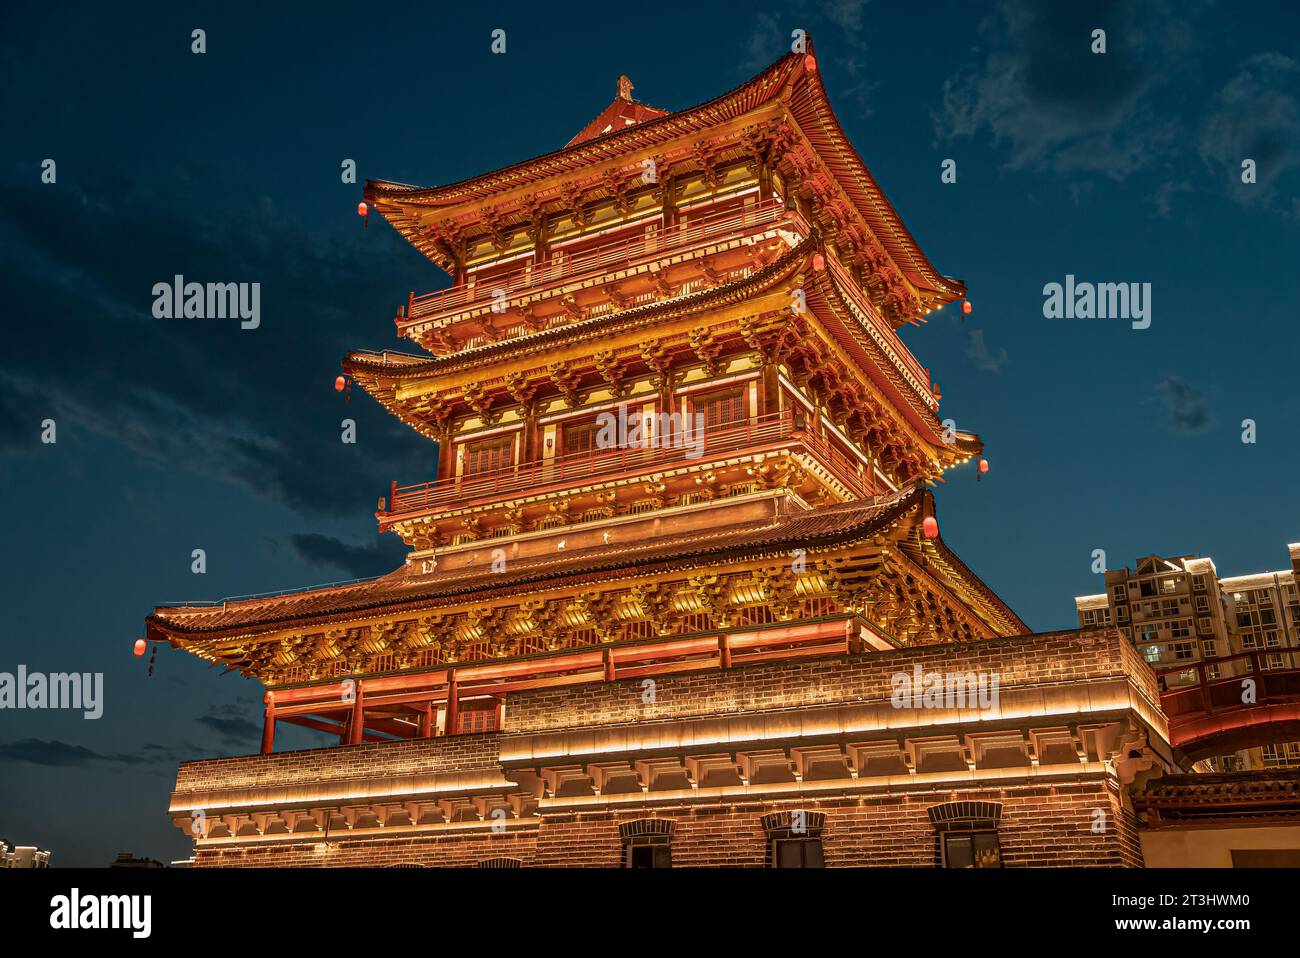 Imitation of Tang Dynasty Architecture in Tangyuan Scenic Area, Xichang City, Sichuan Province, China Stock Photo